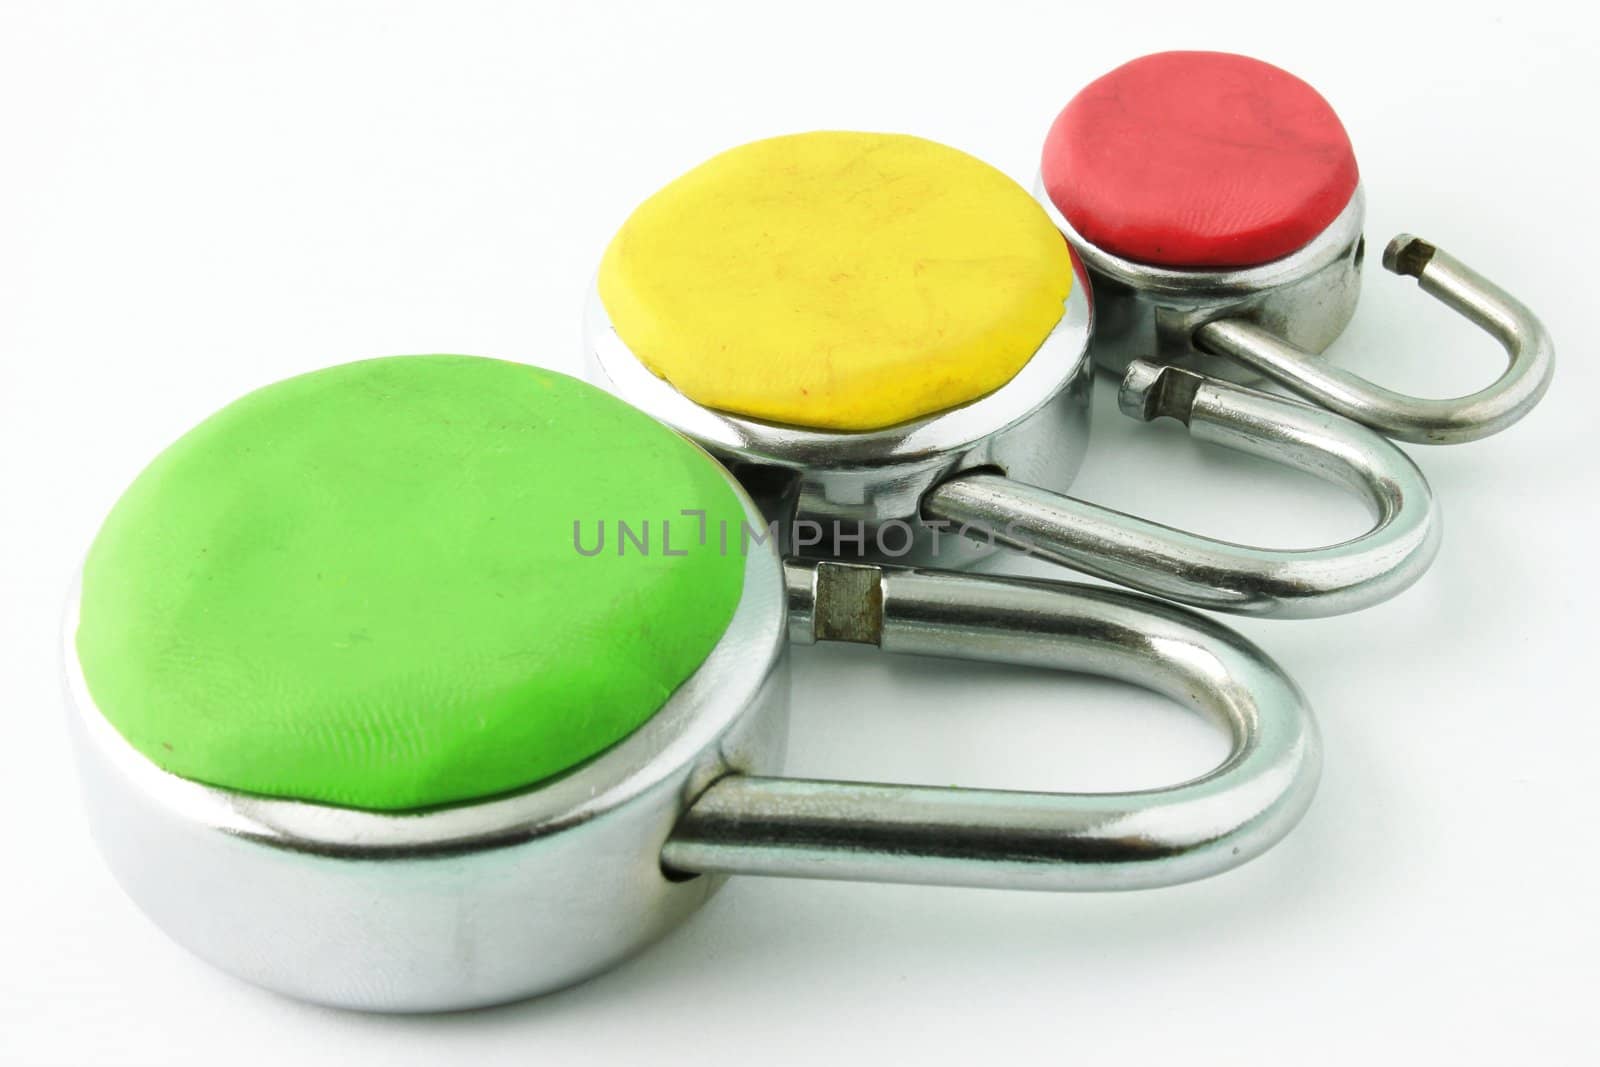 Different levels of security depicted with three padlocks in different colors and sizes